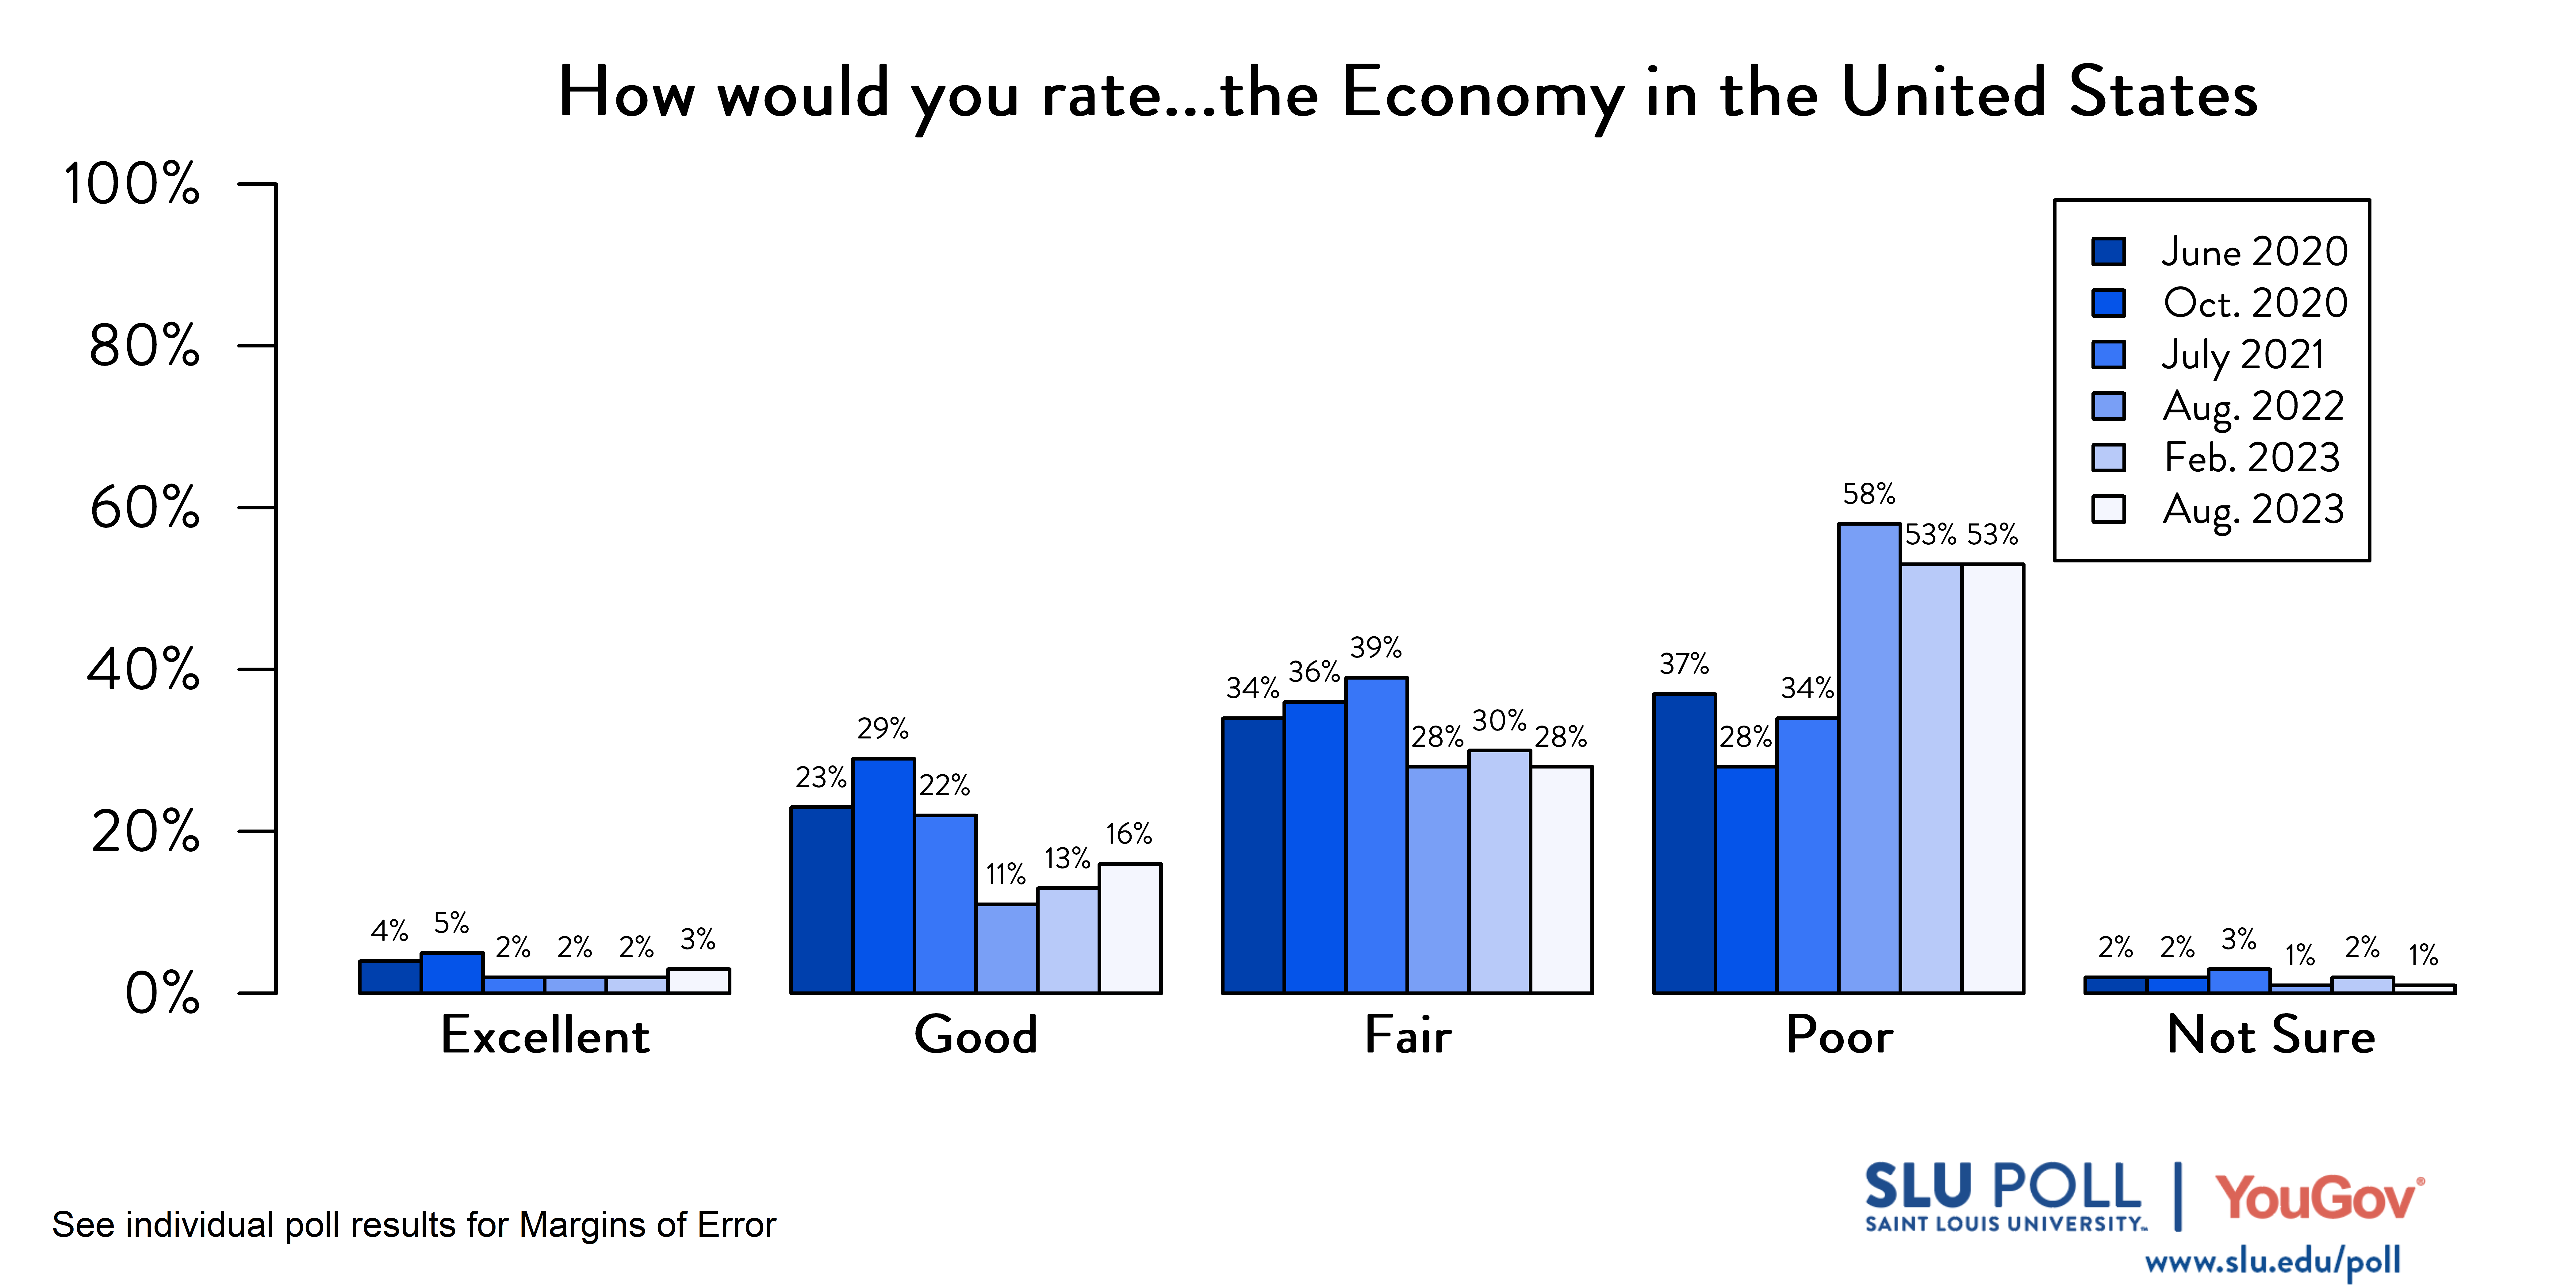 Likely voters' responses to 'How would you rate the condition of the following: The Economy in the United States?'. June 2020 Voter Responses 4% Excellent, 23% Good, 34% Fair, 37% Poor, and 2% Not Sure. October 2020 Voter Responses: 5% Excellent, 29% Good, 36% Fair, 28% Poor, and 2% Not sure. July 2021 Voter Responses: 2% Excellent, 22% Good, 39% Fair, 34% Poor, and 3% Not sure. August 2022 Voter Responses: 2% Excellent, 11% Good, 28% Fair, 58% Poor, and 1% Not sure. February 2023 Voter Responses: 2% Excellent, 13% Good, 30% Fair, 53% Poor, and 2% Not sure. August 2023 Voter Responses: 3% Excellent, 16% Good, 28% Fair, 53% Poor, and 1% Not sure.